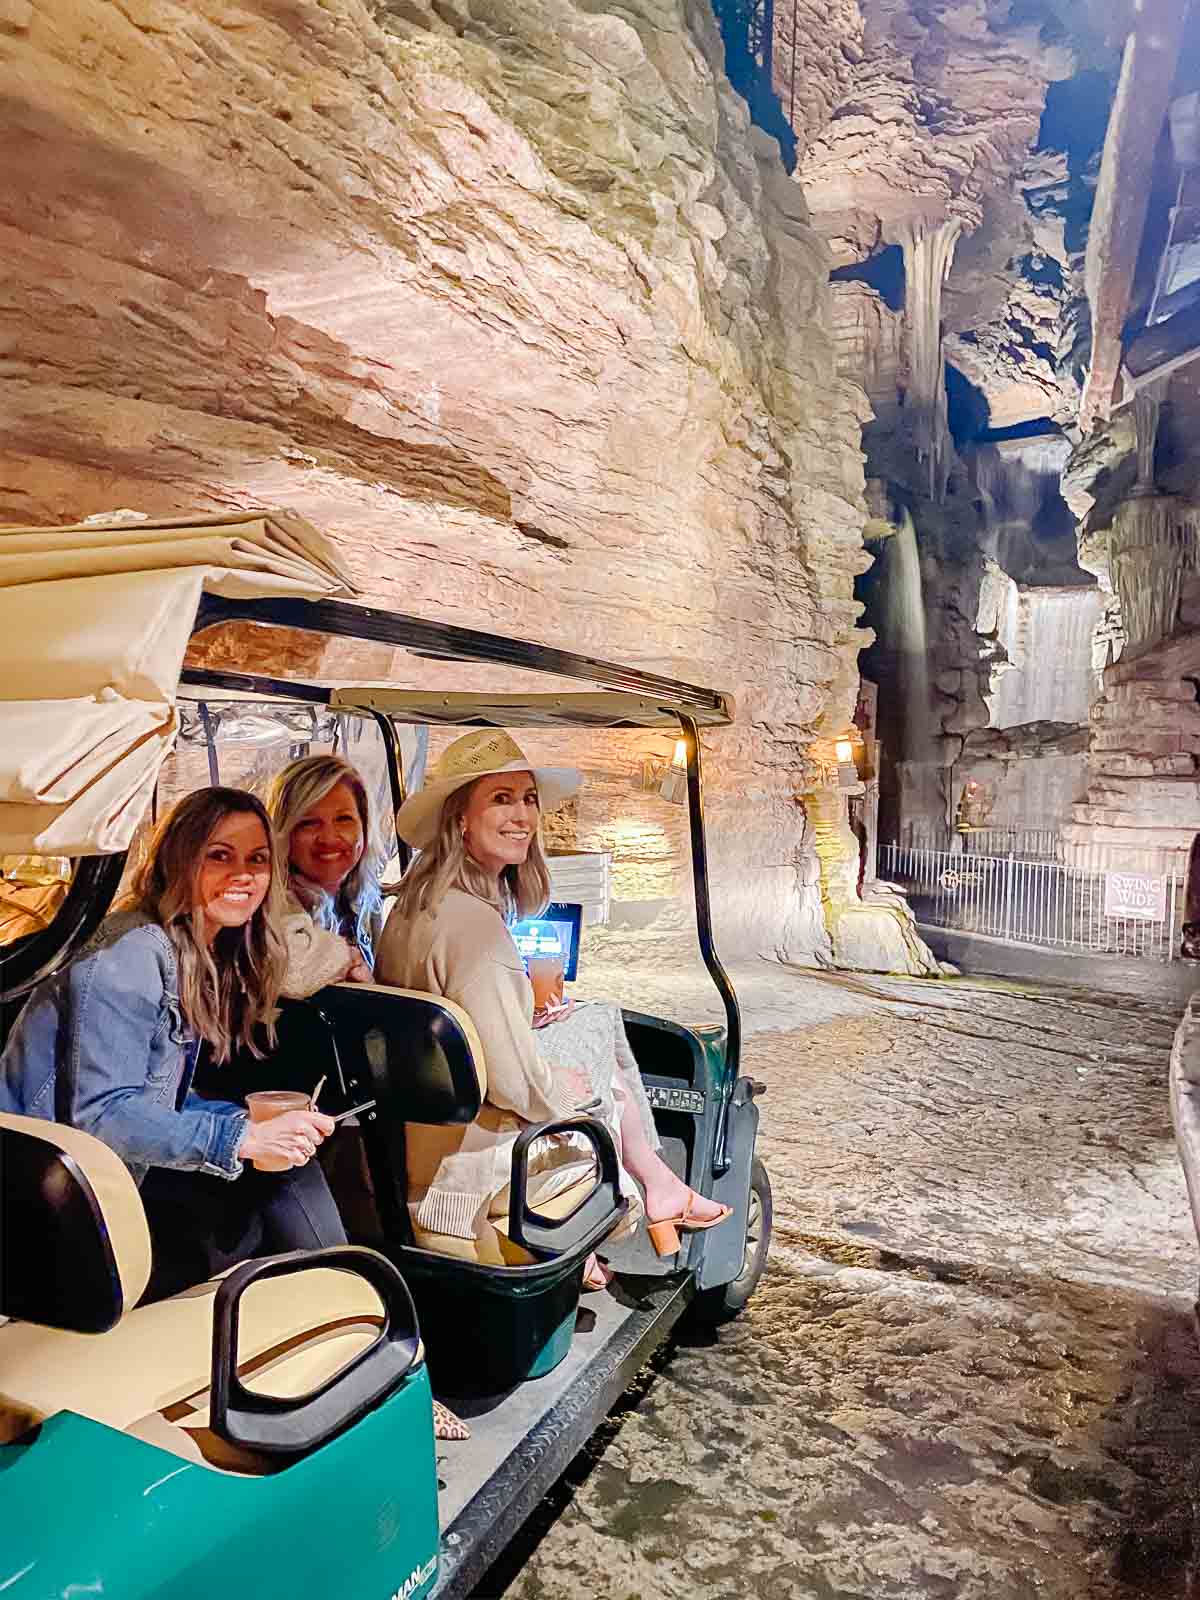 Three people sitting in a golf cart inside a cave with stalactites and rock formations in the background, showcasing one of the unique things to do in Branson.